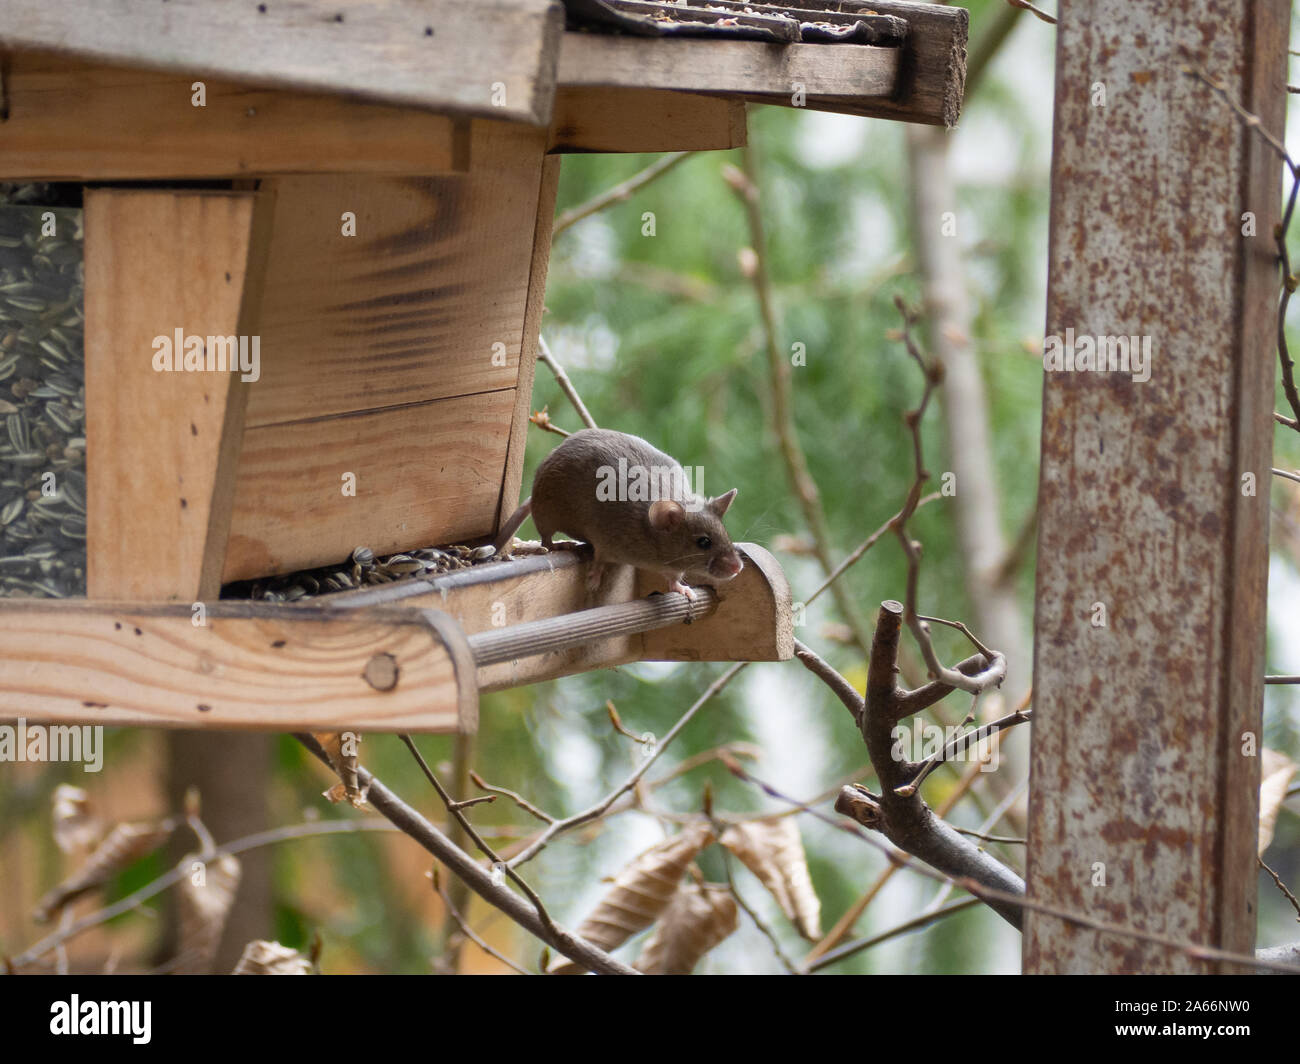 House mouse steals birdseed in a birdhouse Stock Photo